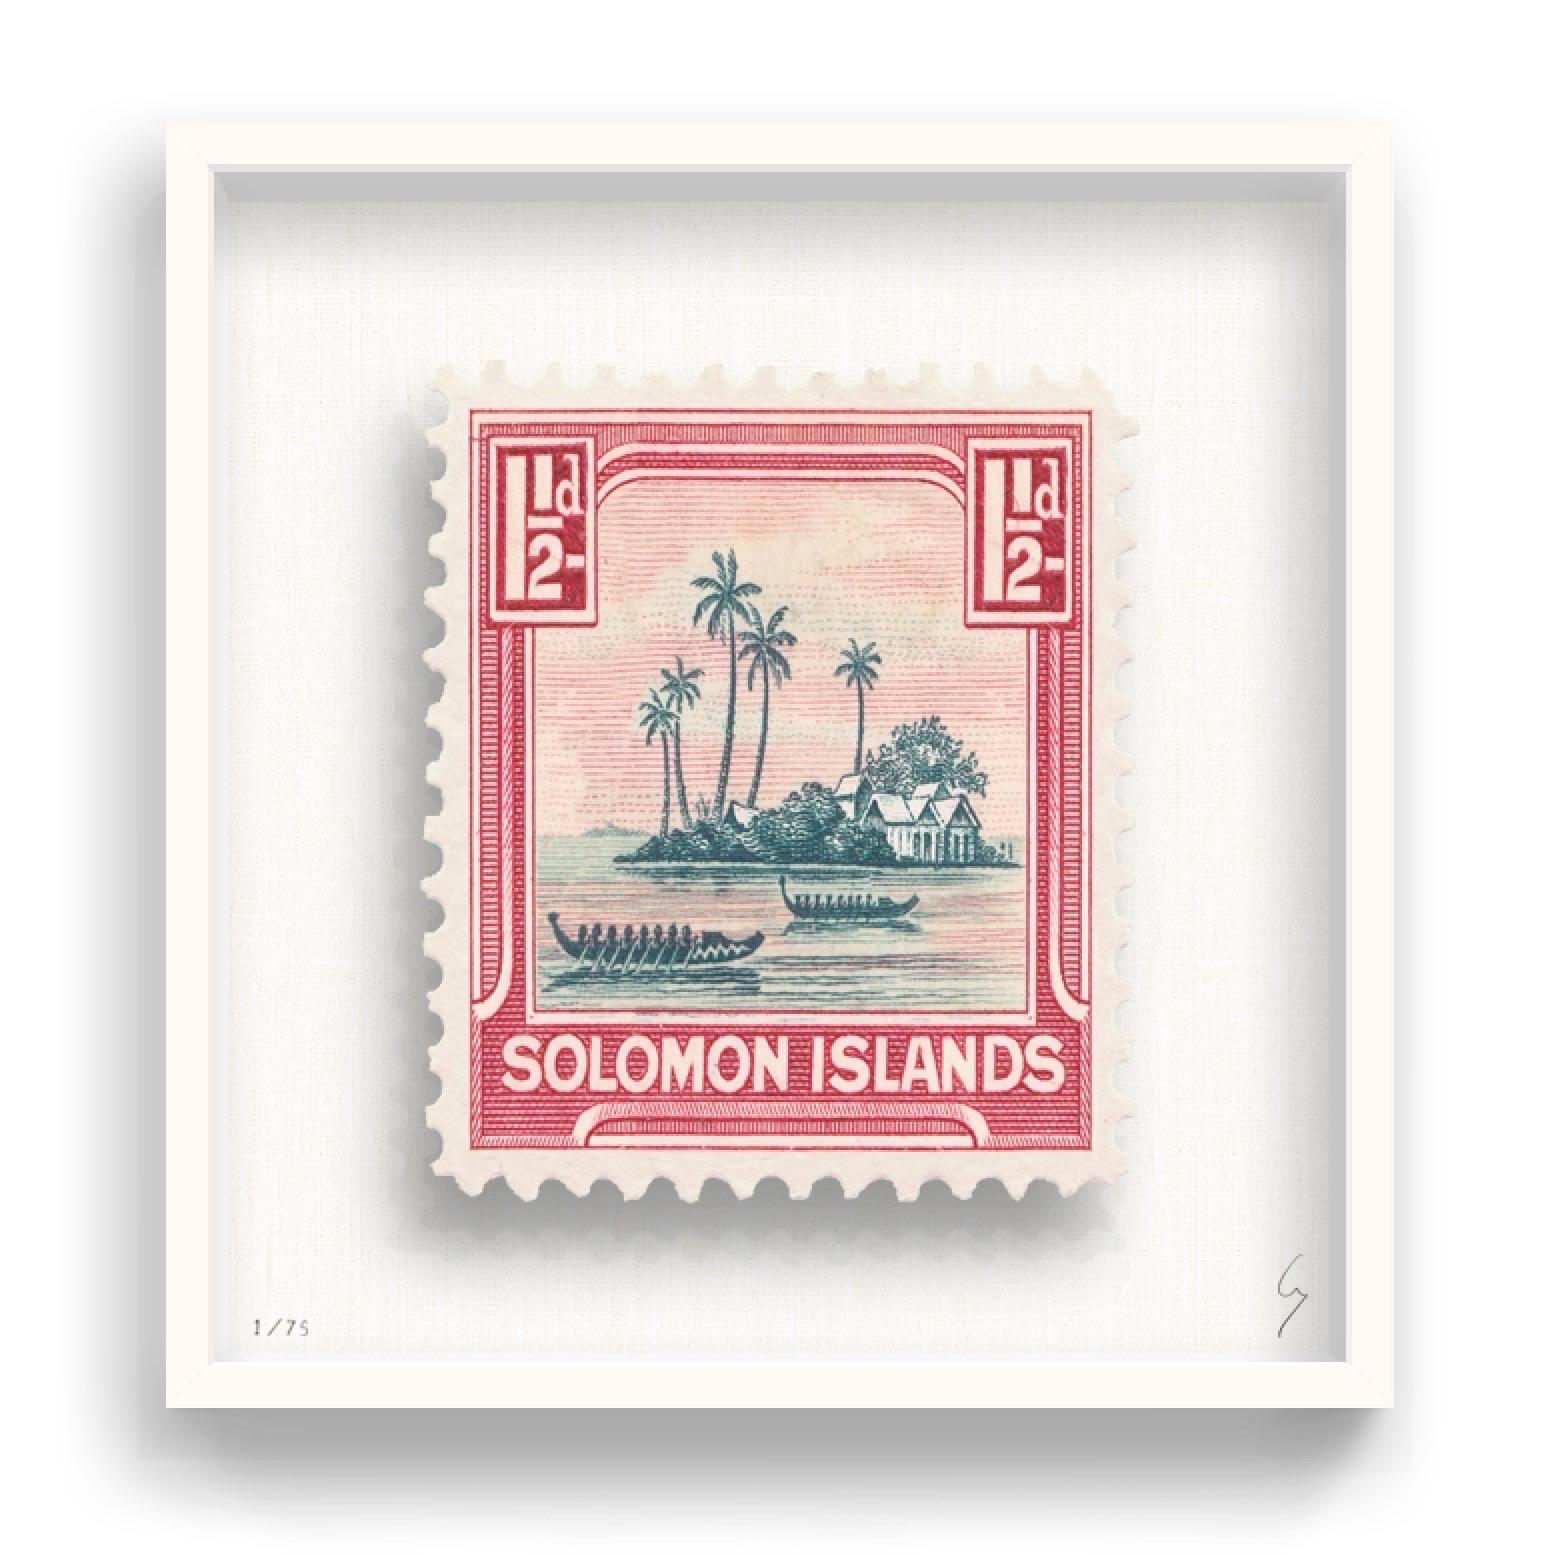 Guy Gee, Solomon Islands ( medium)

Hand-engraved print on 350gsm on G.F Smith card
31 x 35 cm (12 1/5 x 13 4/5)
Frame included 
Edition of 75 

Each artwork by Guy had been digitally reimagined from an original postage stamp. Cut out and finished